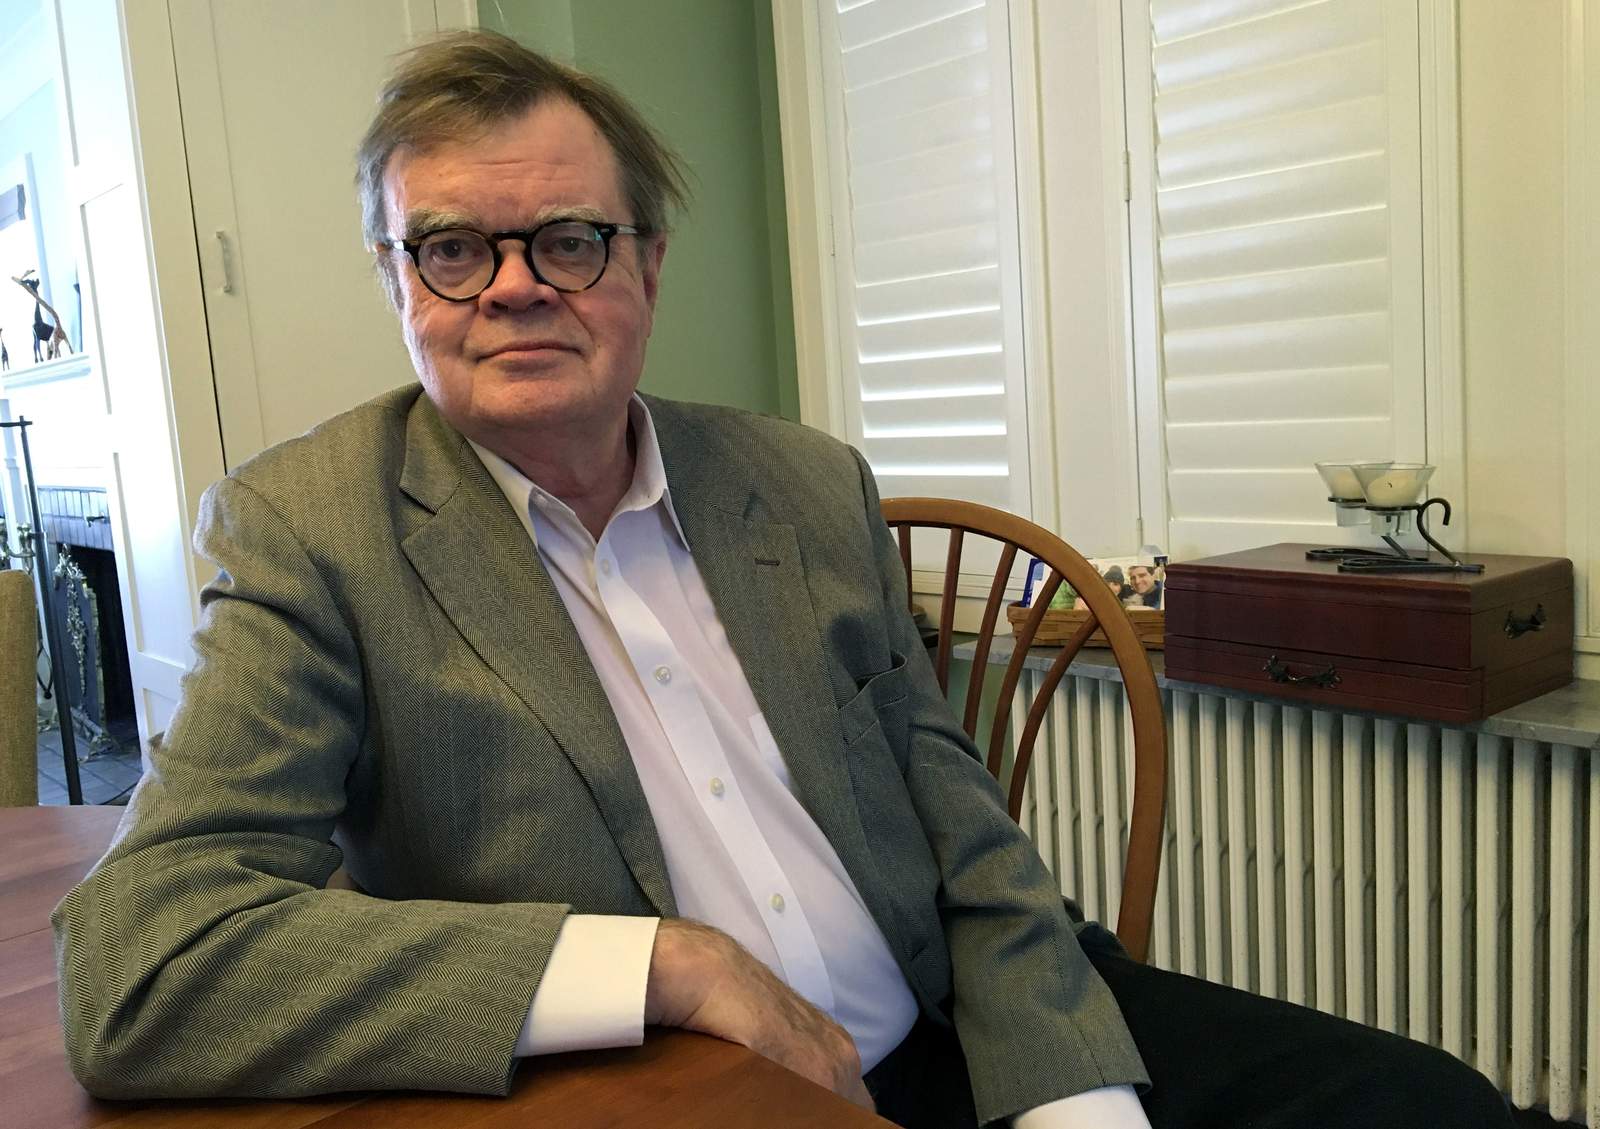 2 Garrison Keillor books set for release this fall